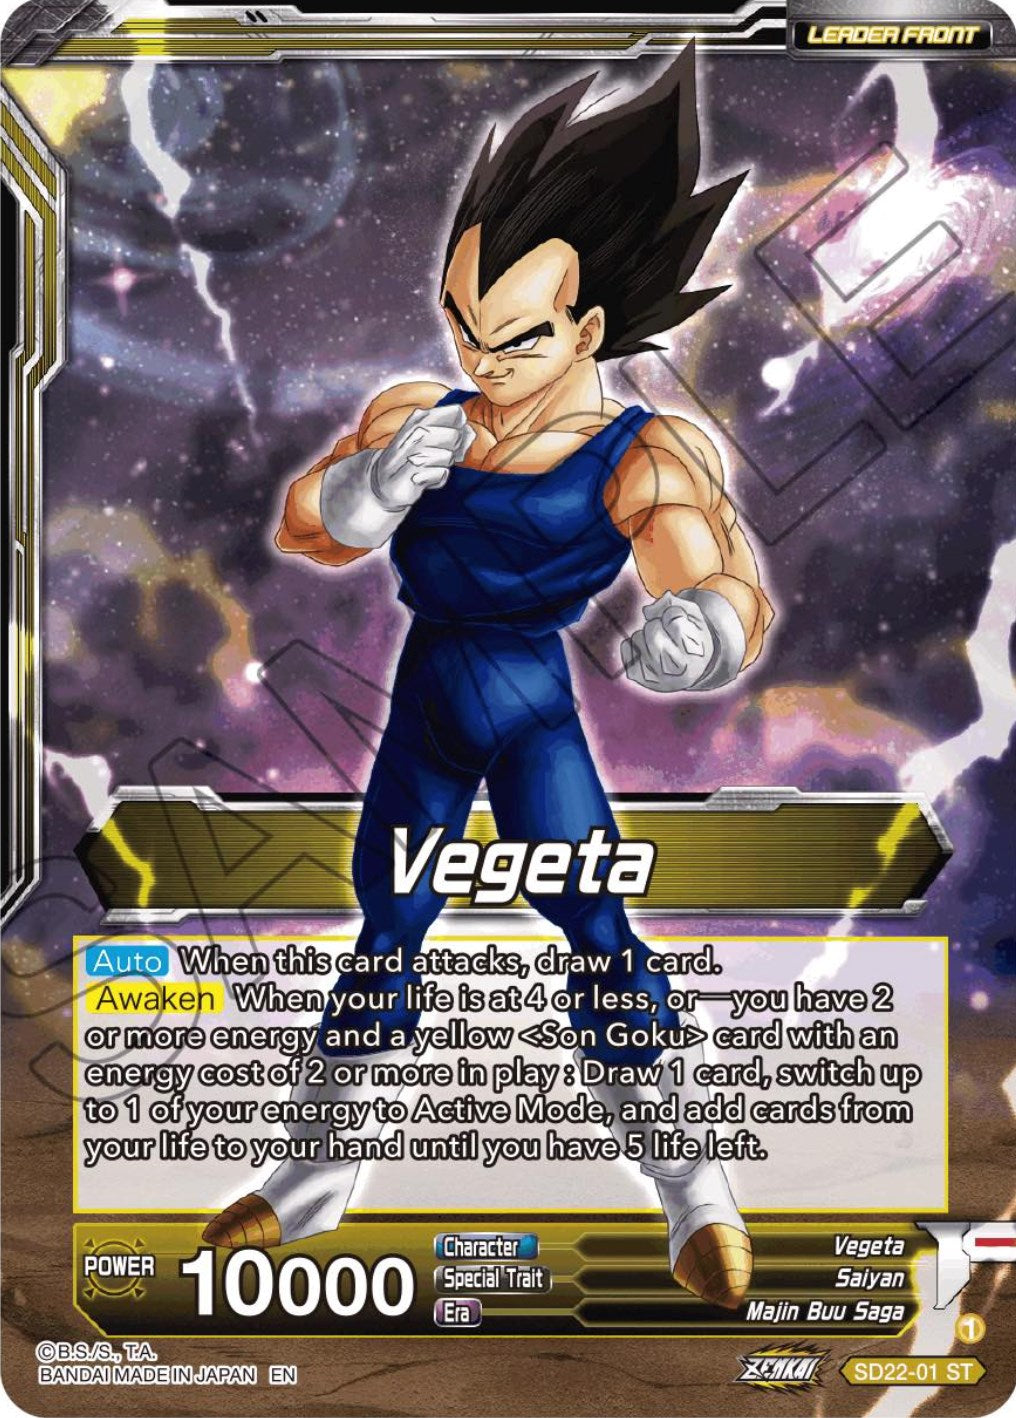 Vegeta // SS Vegeta, Fighting Instincts (Starter Deck Exclusive) (SD22-01) [Power Absorbed] | Arkham Games and Comics